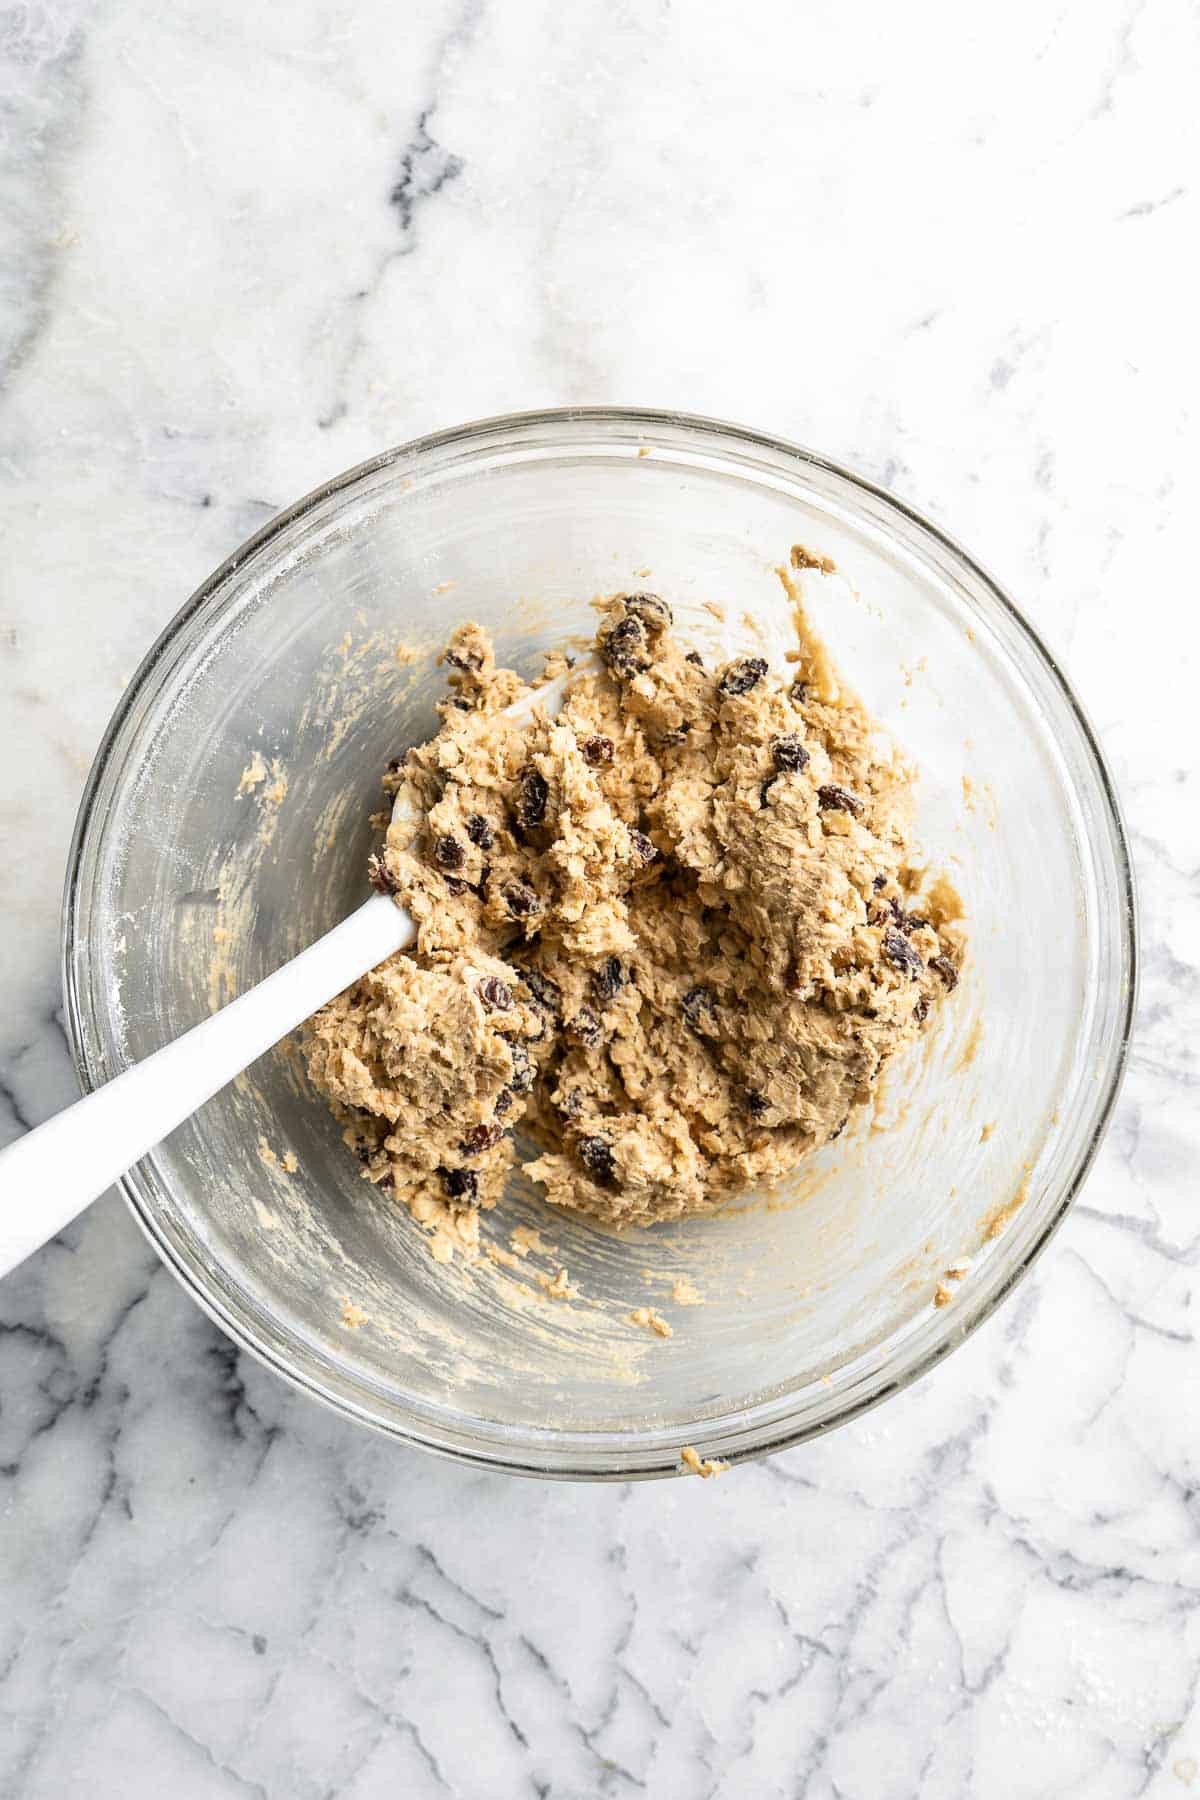 Soft and chewy Oatmeal Raisin Cookies are a quick and easy one bowl recipe made using simple pantry staple ingredients in under 20 minutes with no chilling! | aheadofthyme.com